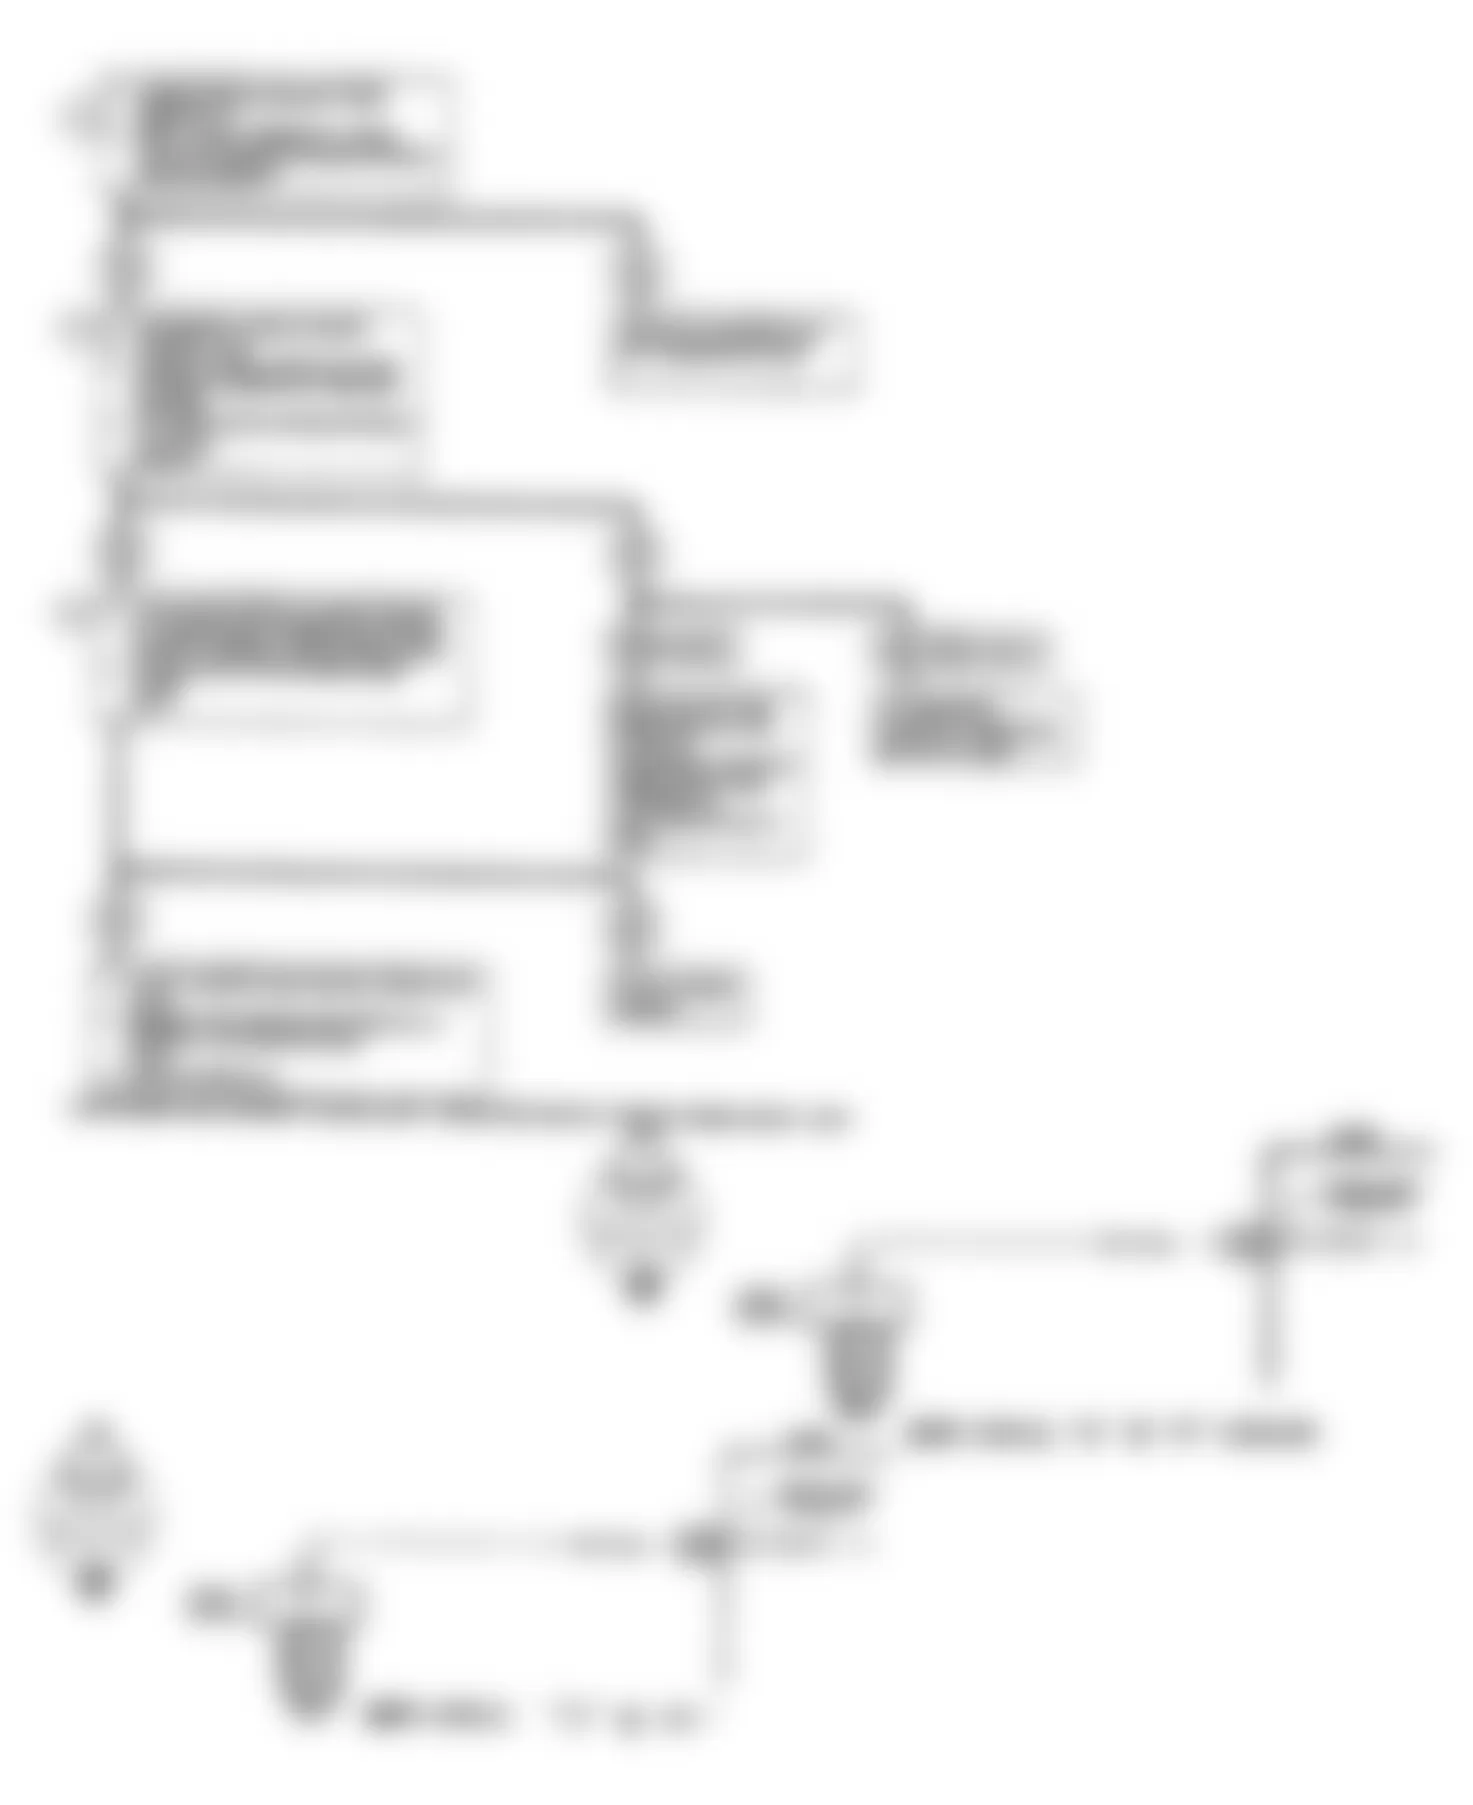 Buick Electra Limited 1990 - Component Locations -  Code 43: Elect Spark Control Flow Chart